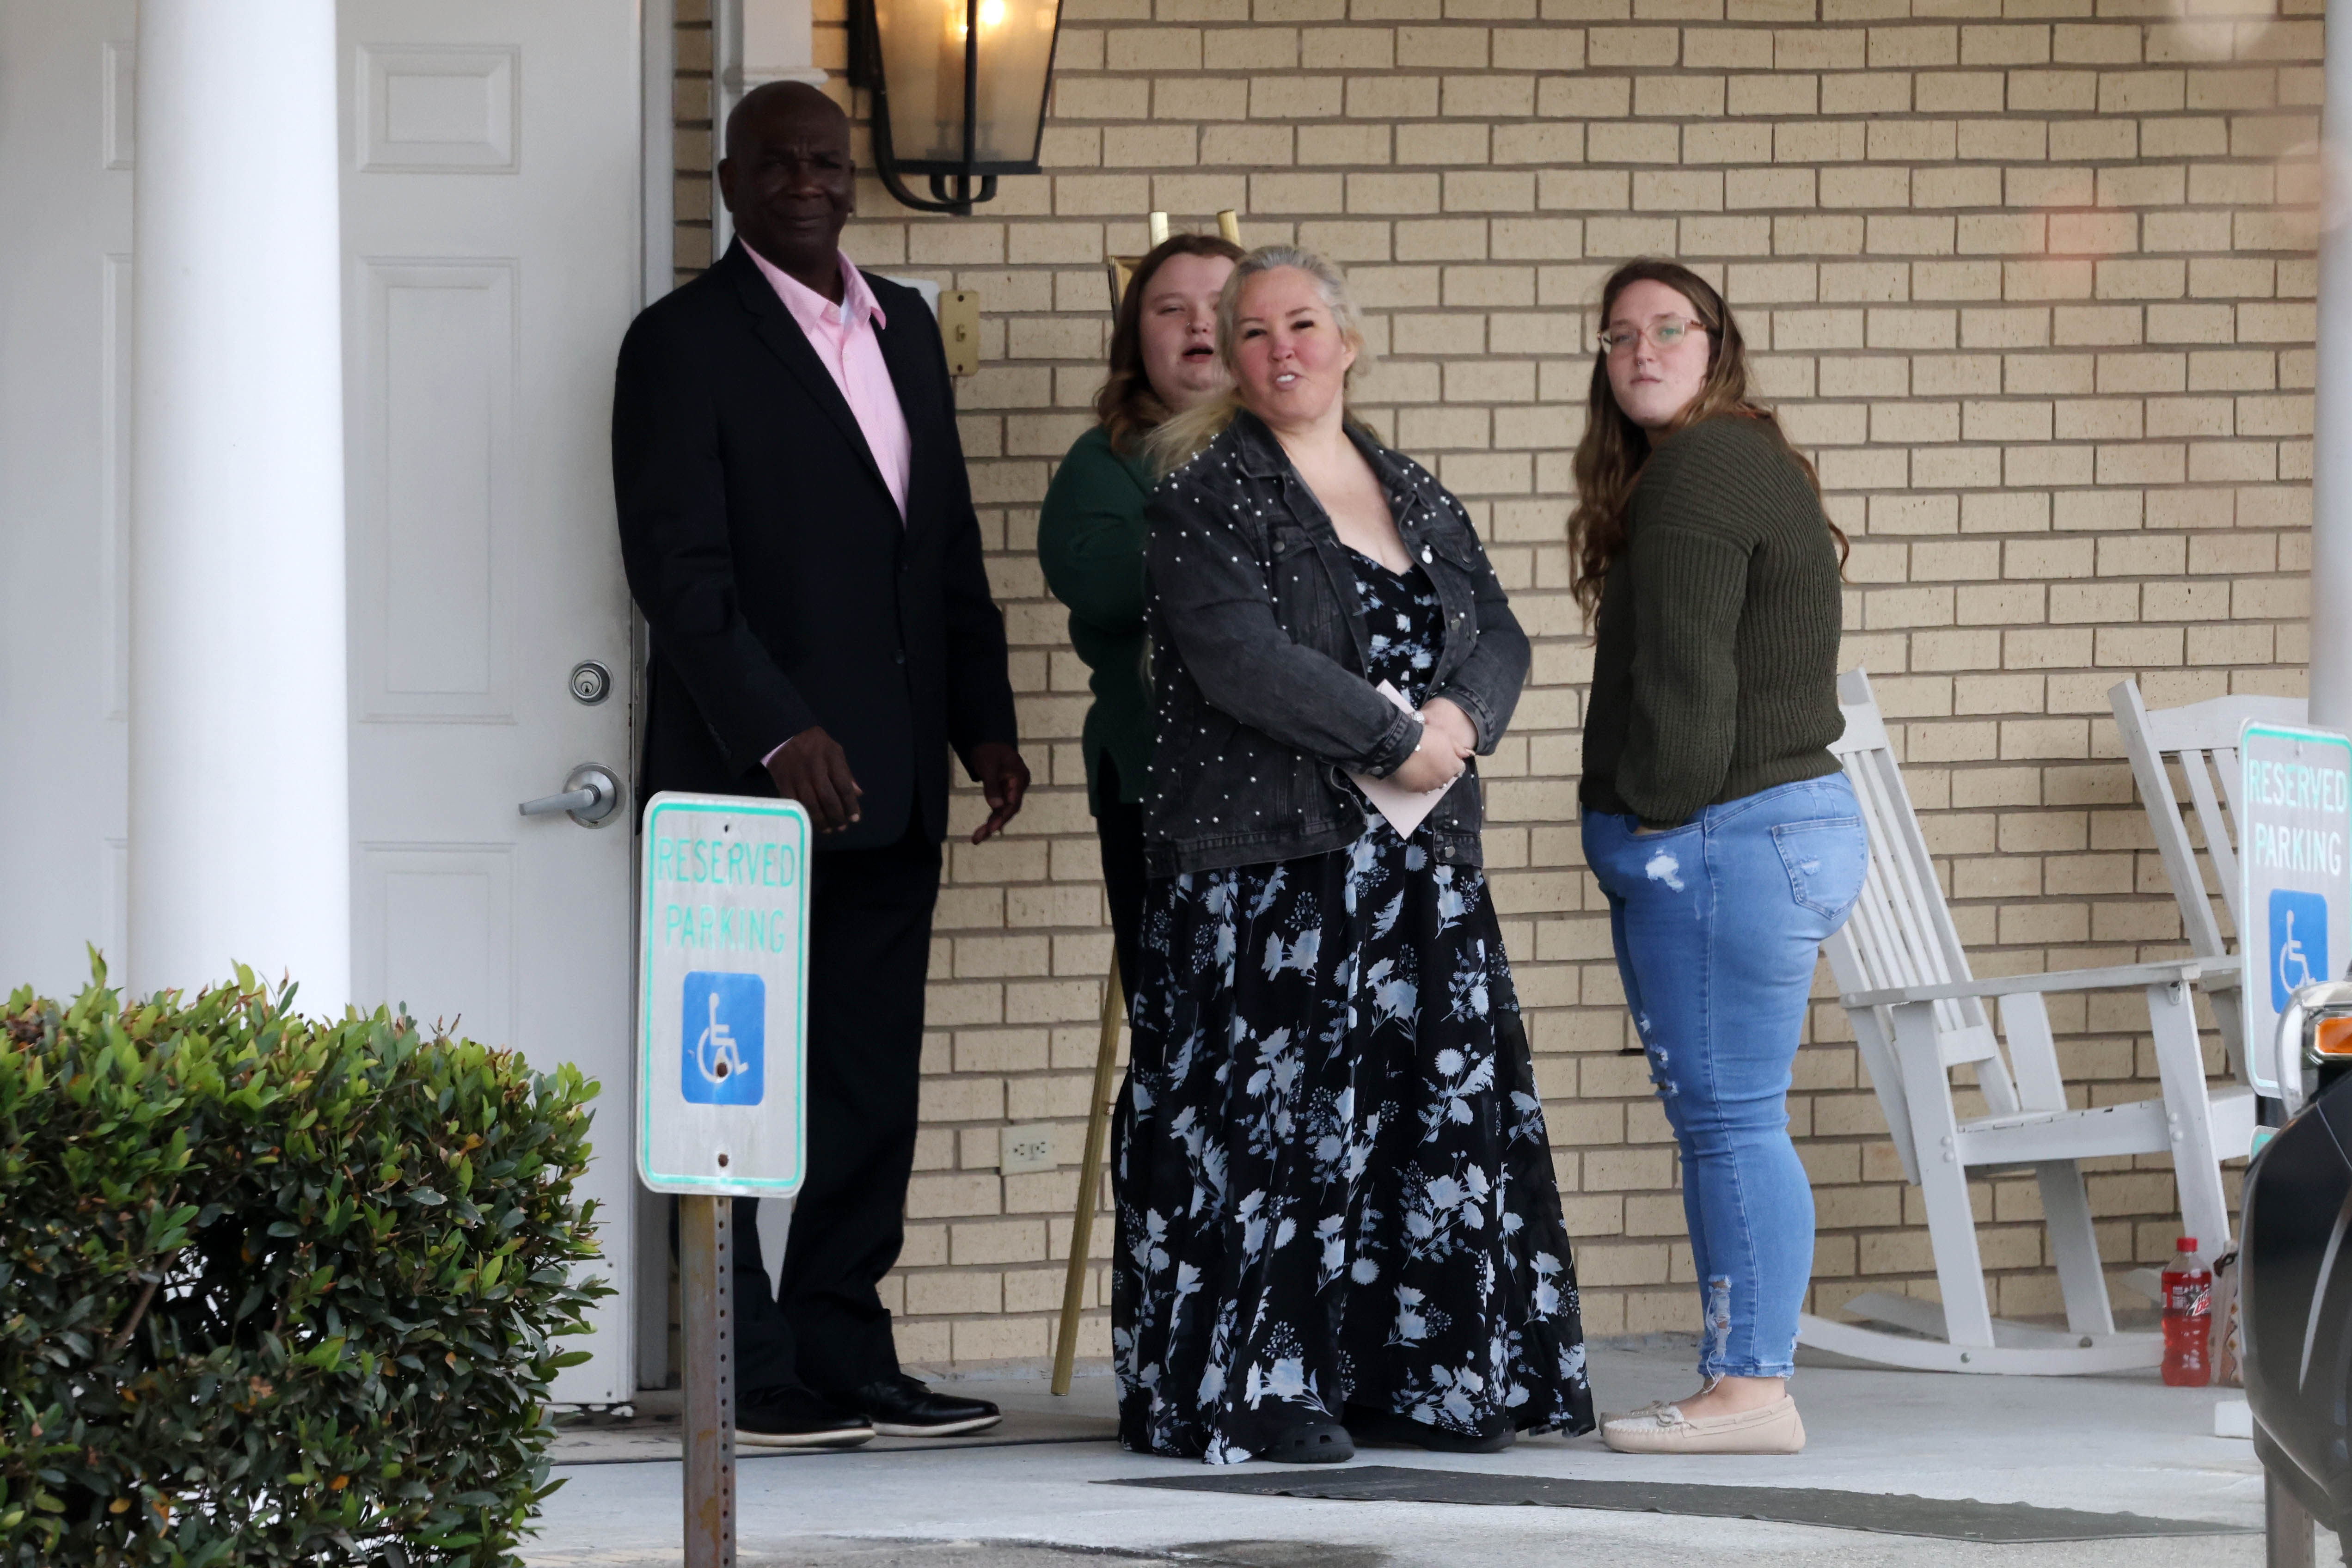 Mama June and her family have been mourning Anna's death